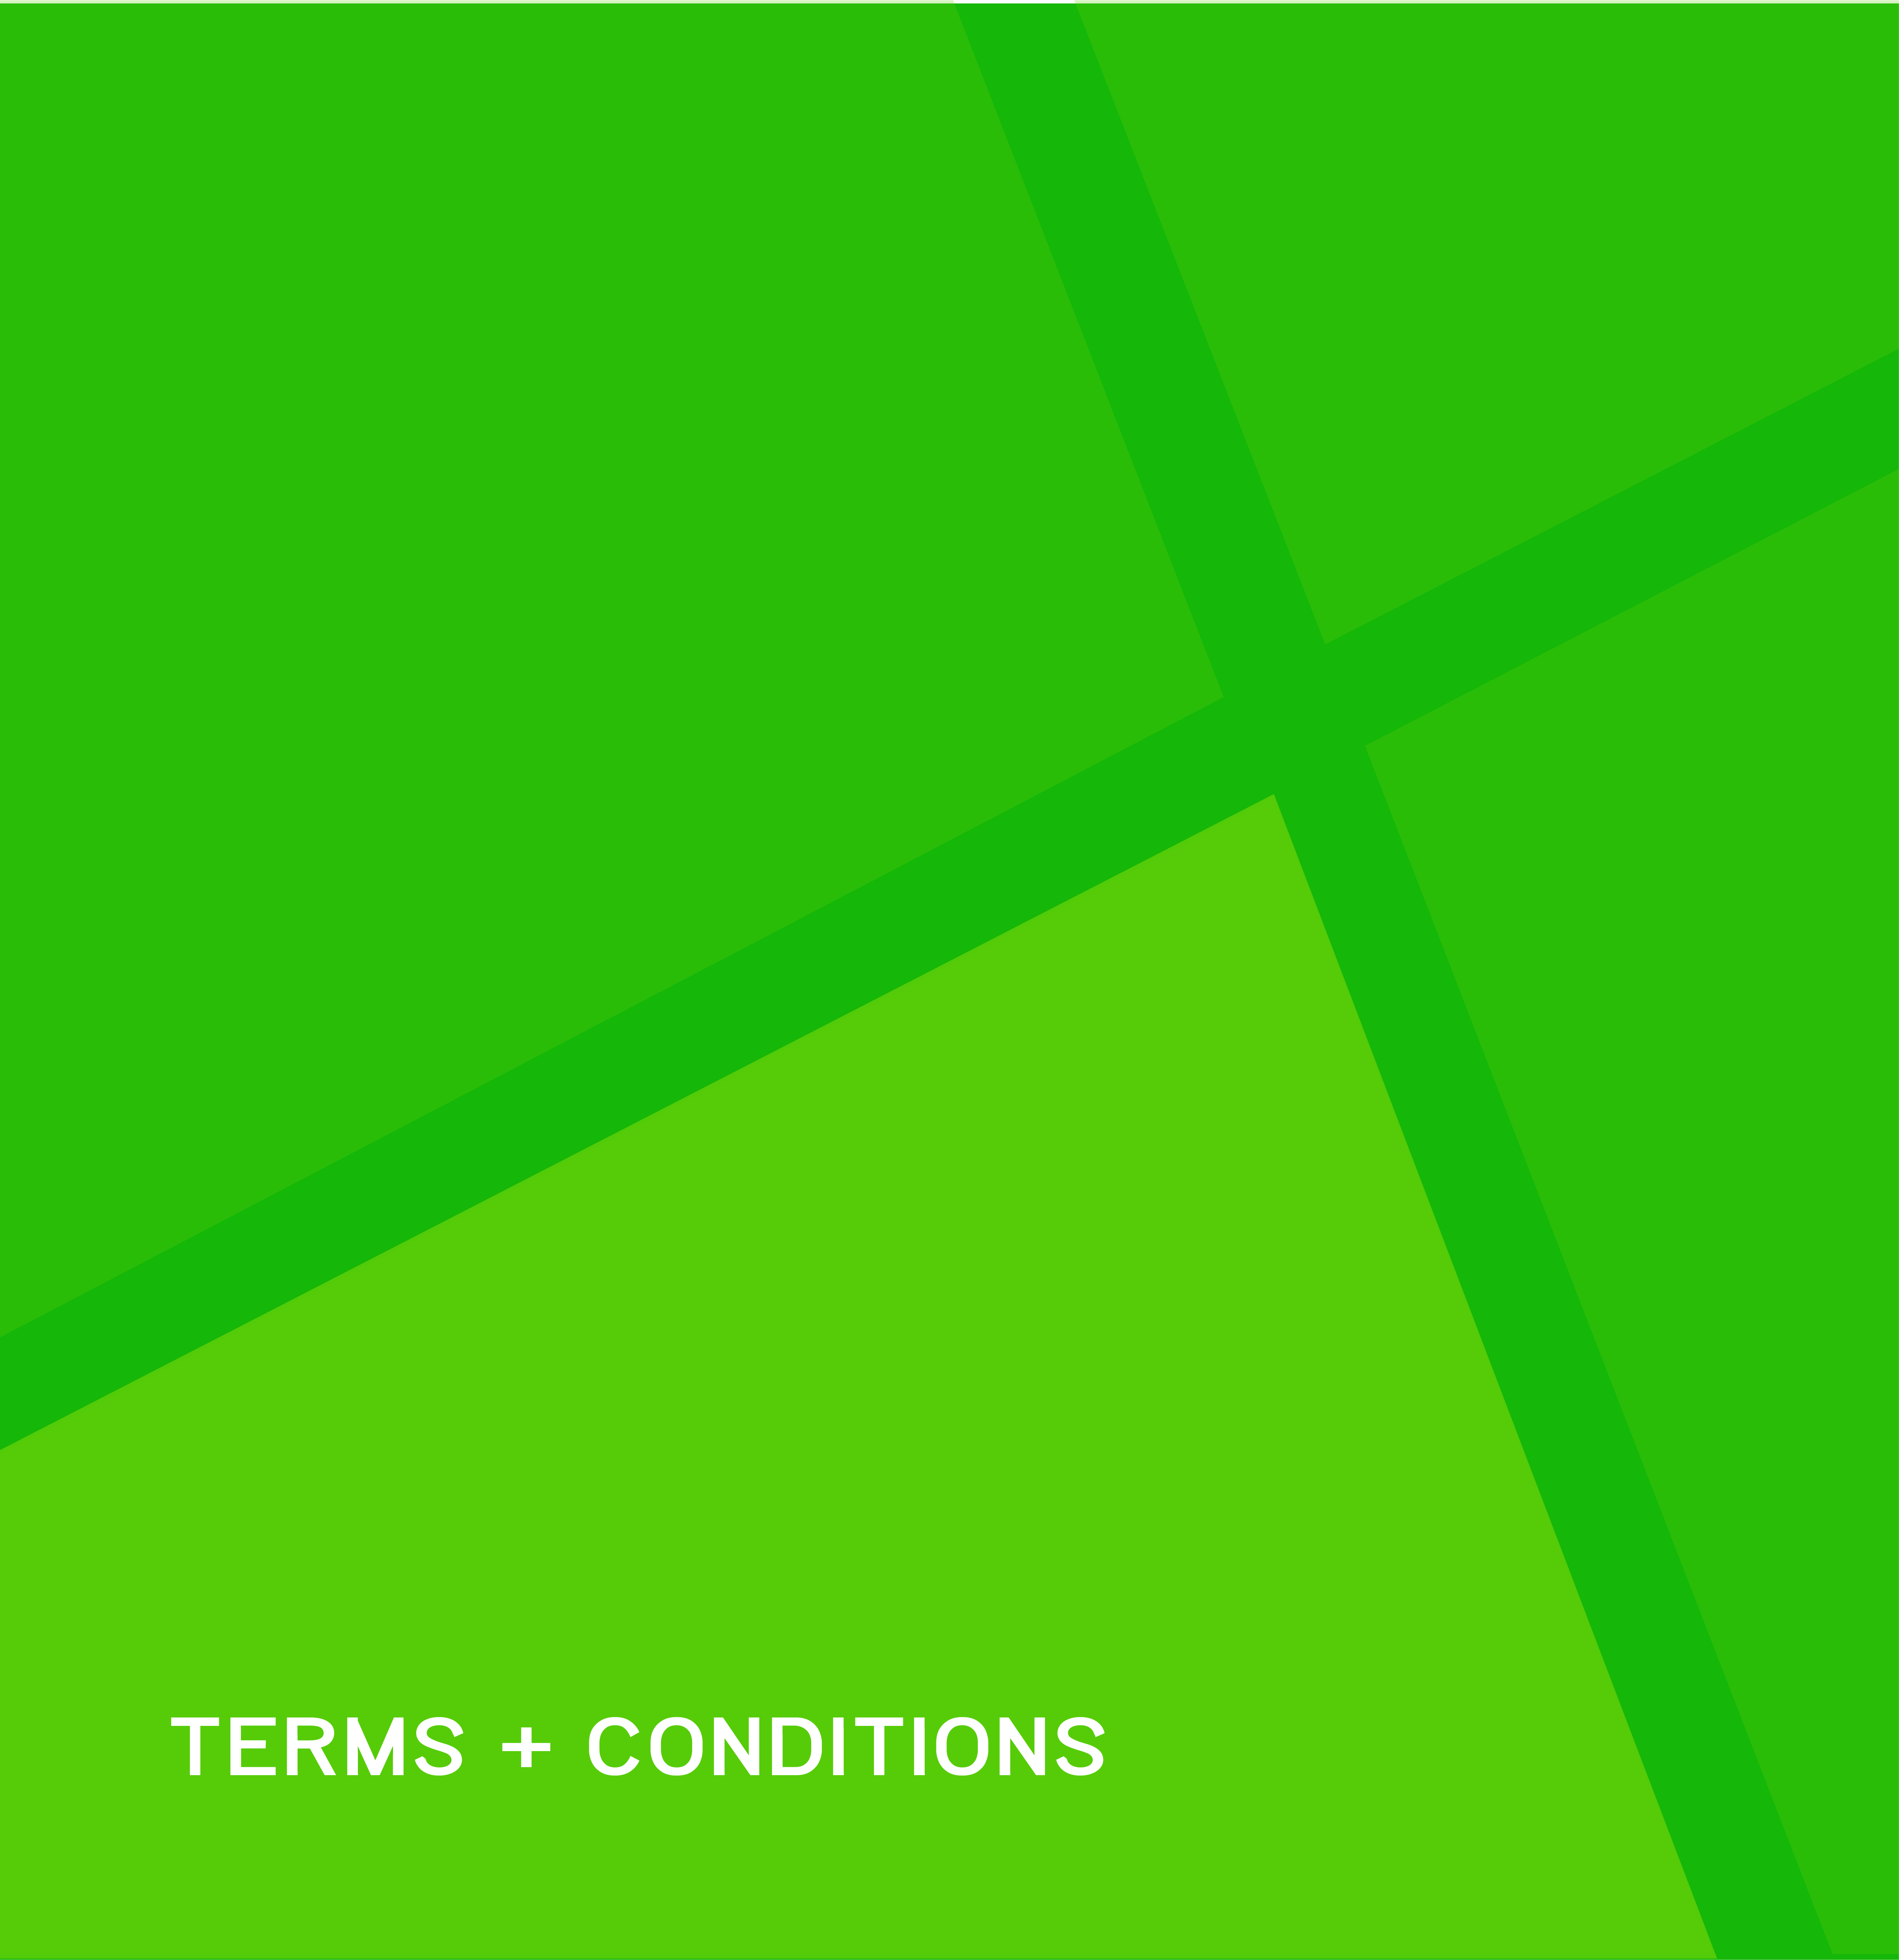 Terms + Conditions What you need to know about using our services / products and doing business with us.